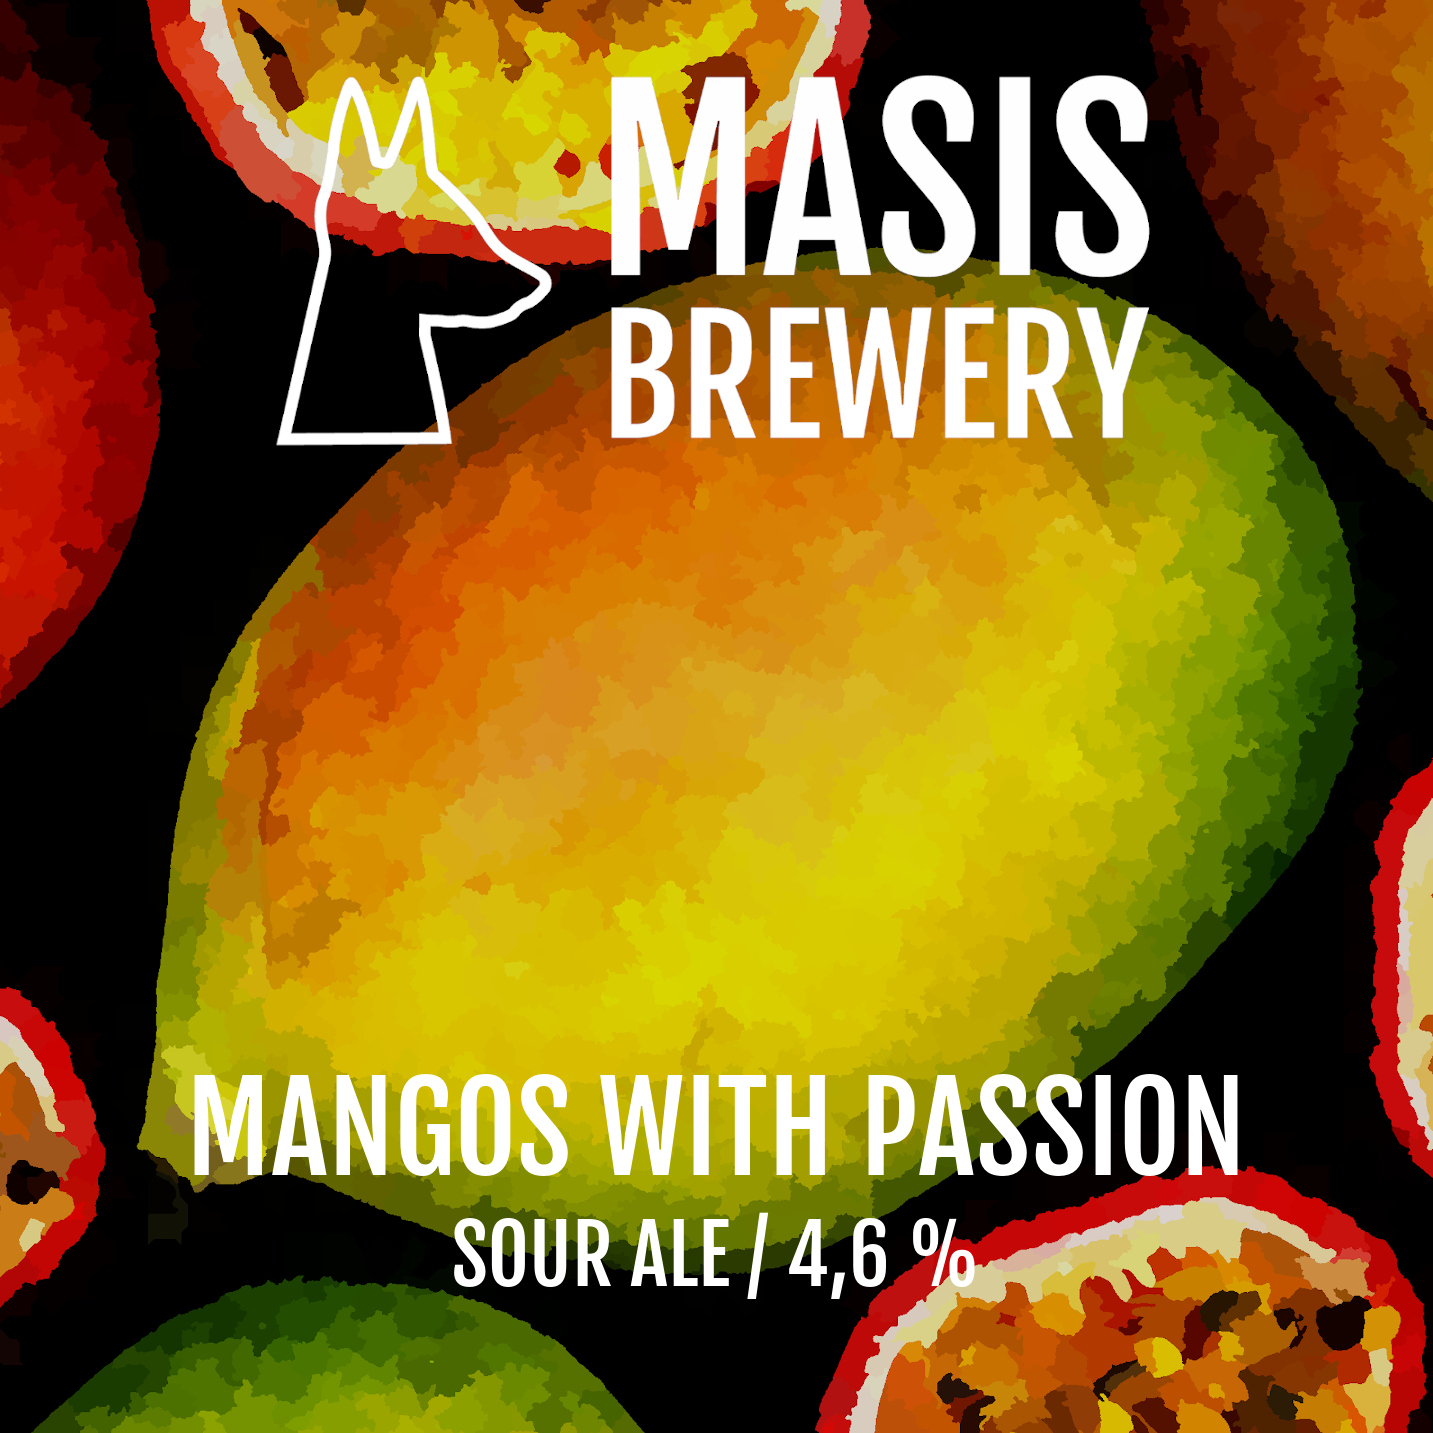 Masis Mangos with Passion Sour Ale 4,6% - 0,33l can